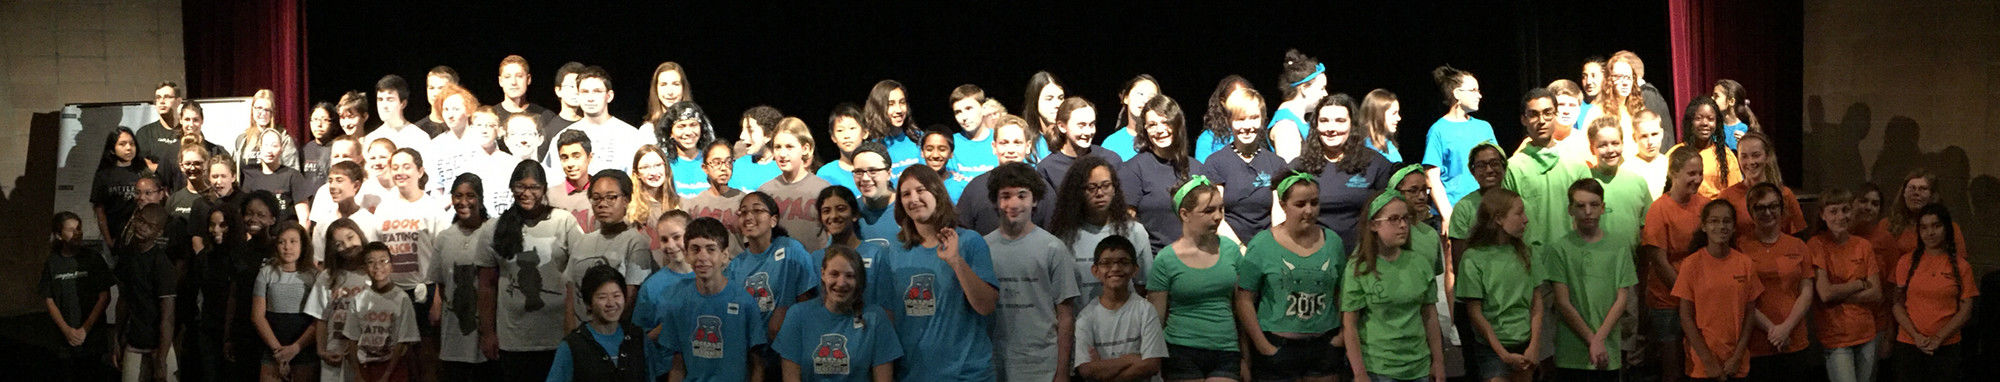 Battle of the Books 2016 Participants [see full image]